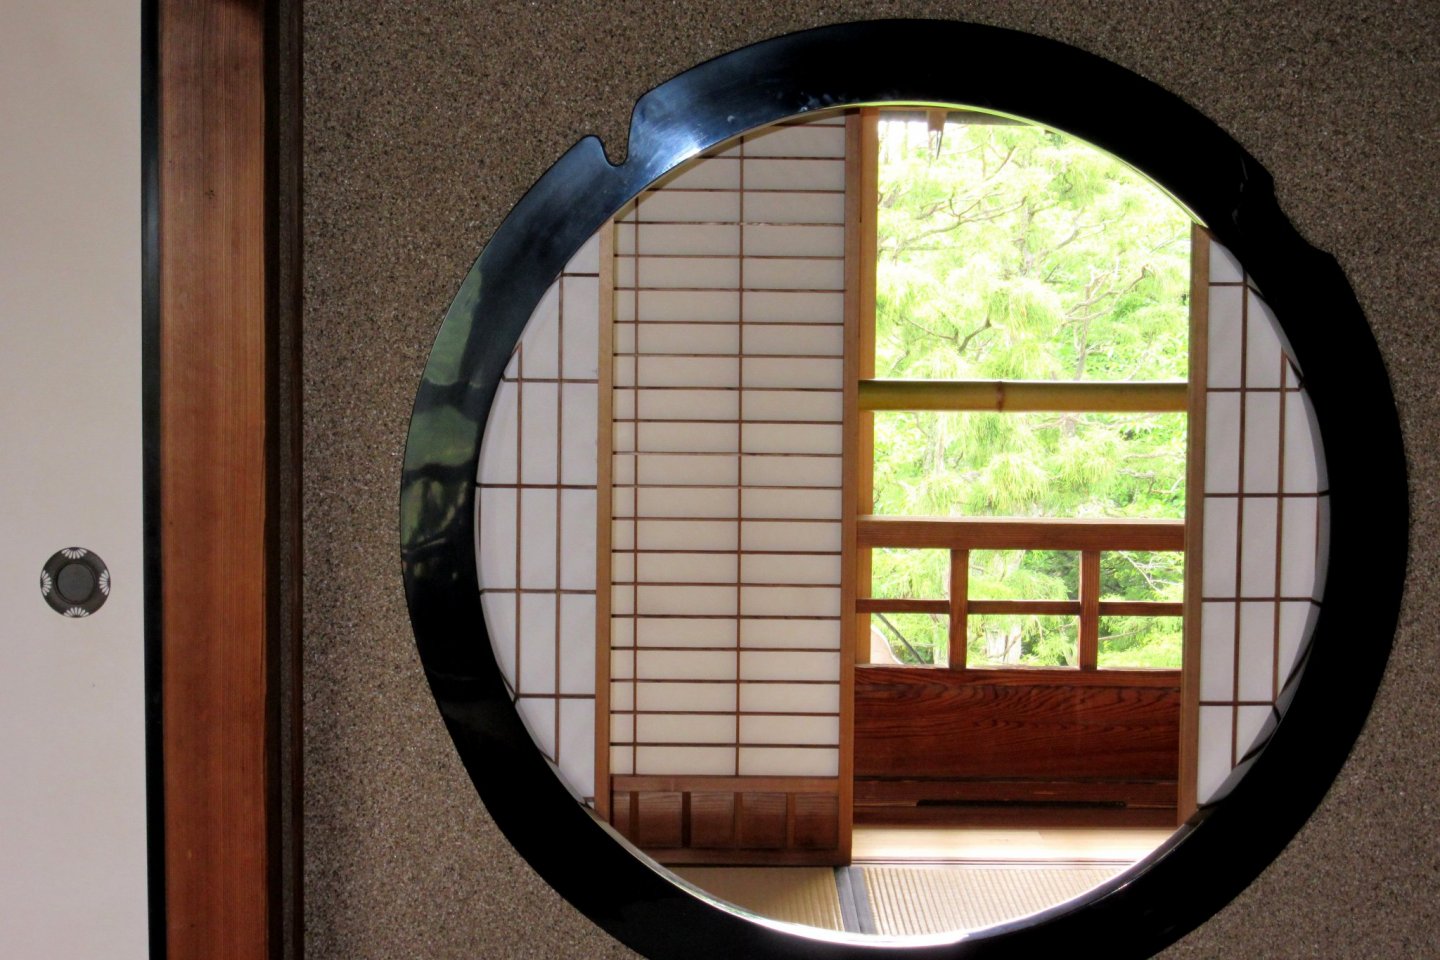 Geometry of traditional Japanese house